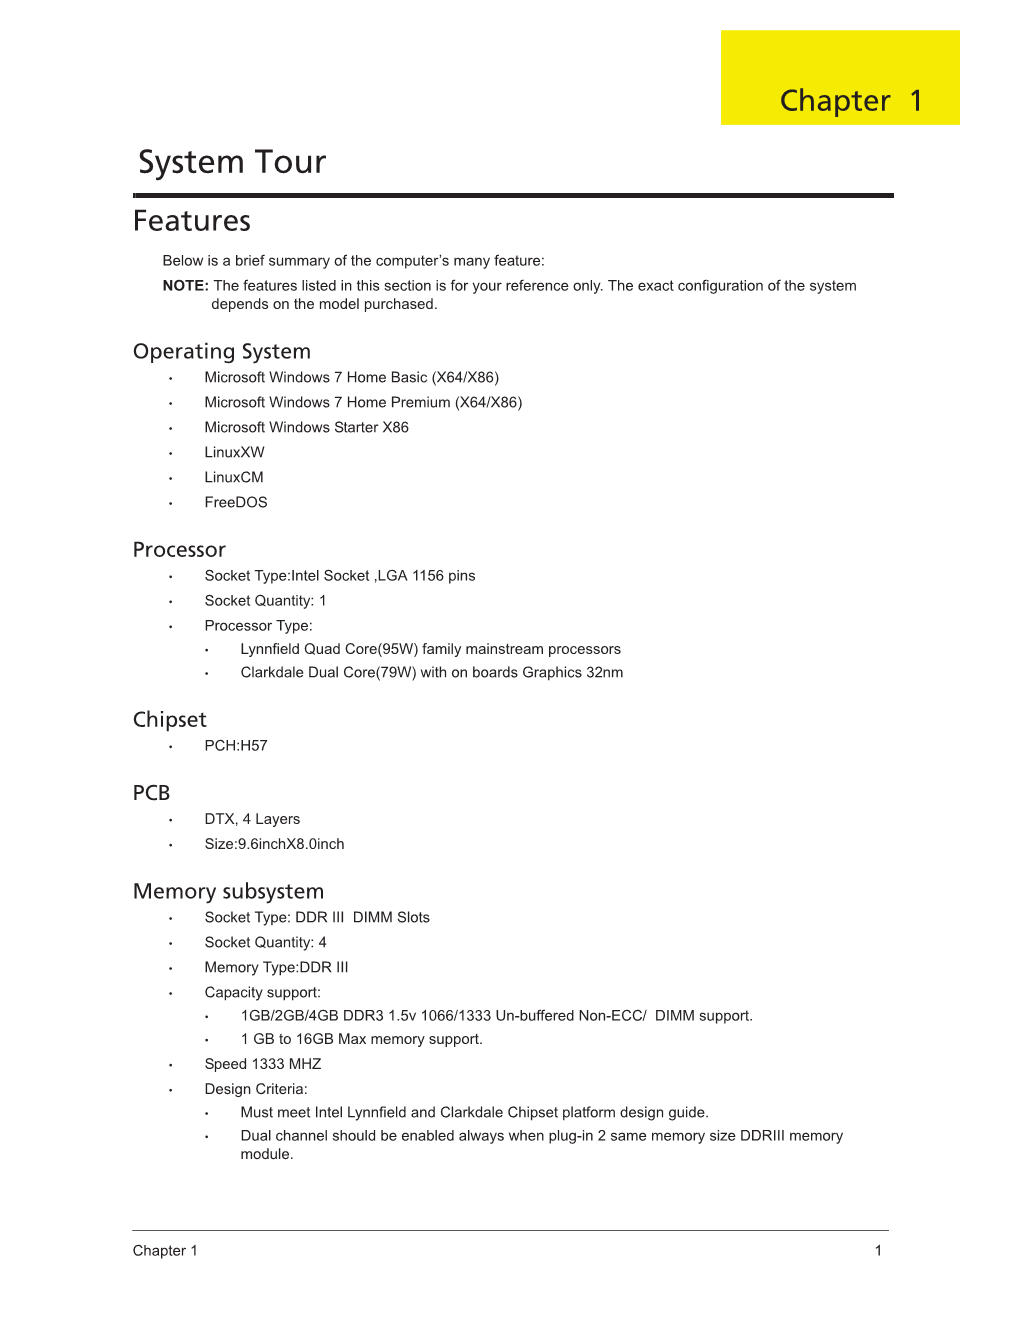 System Tour Features